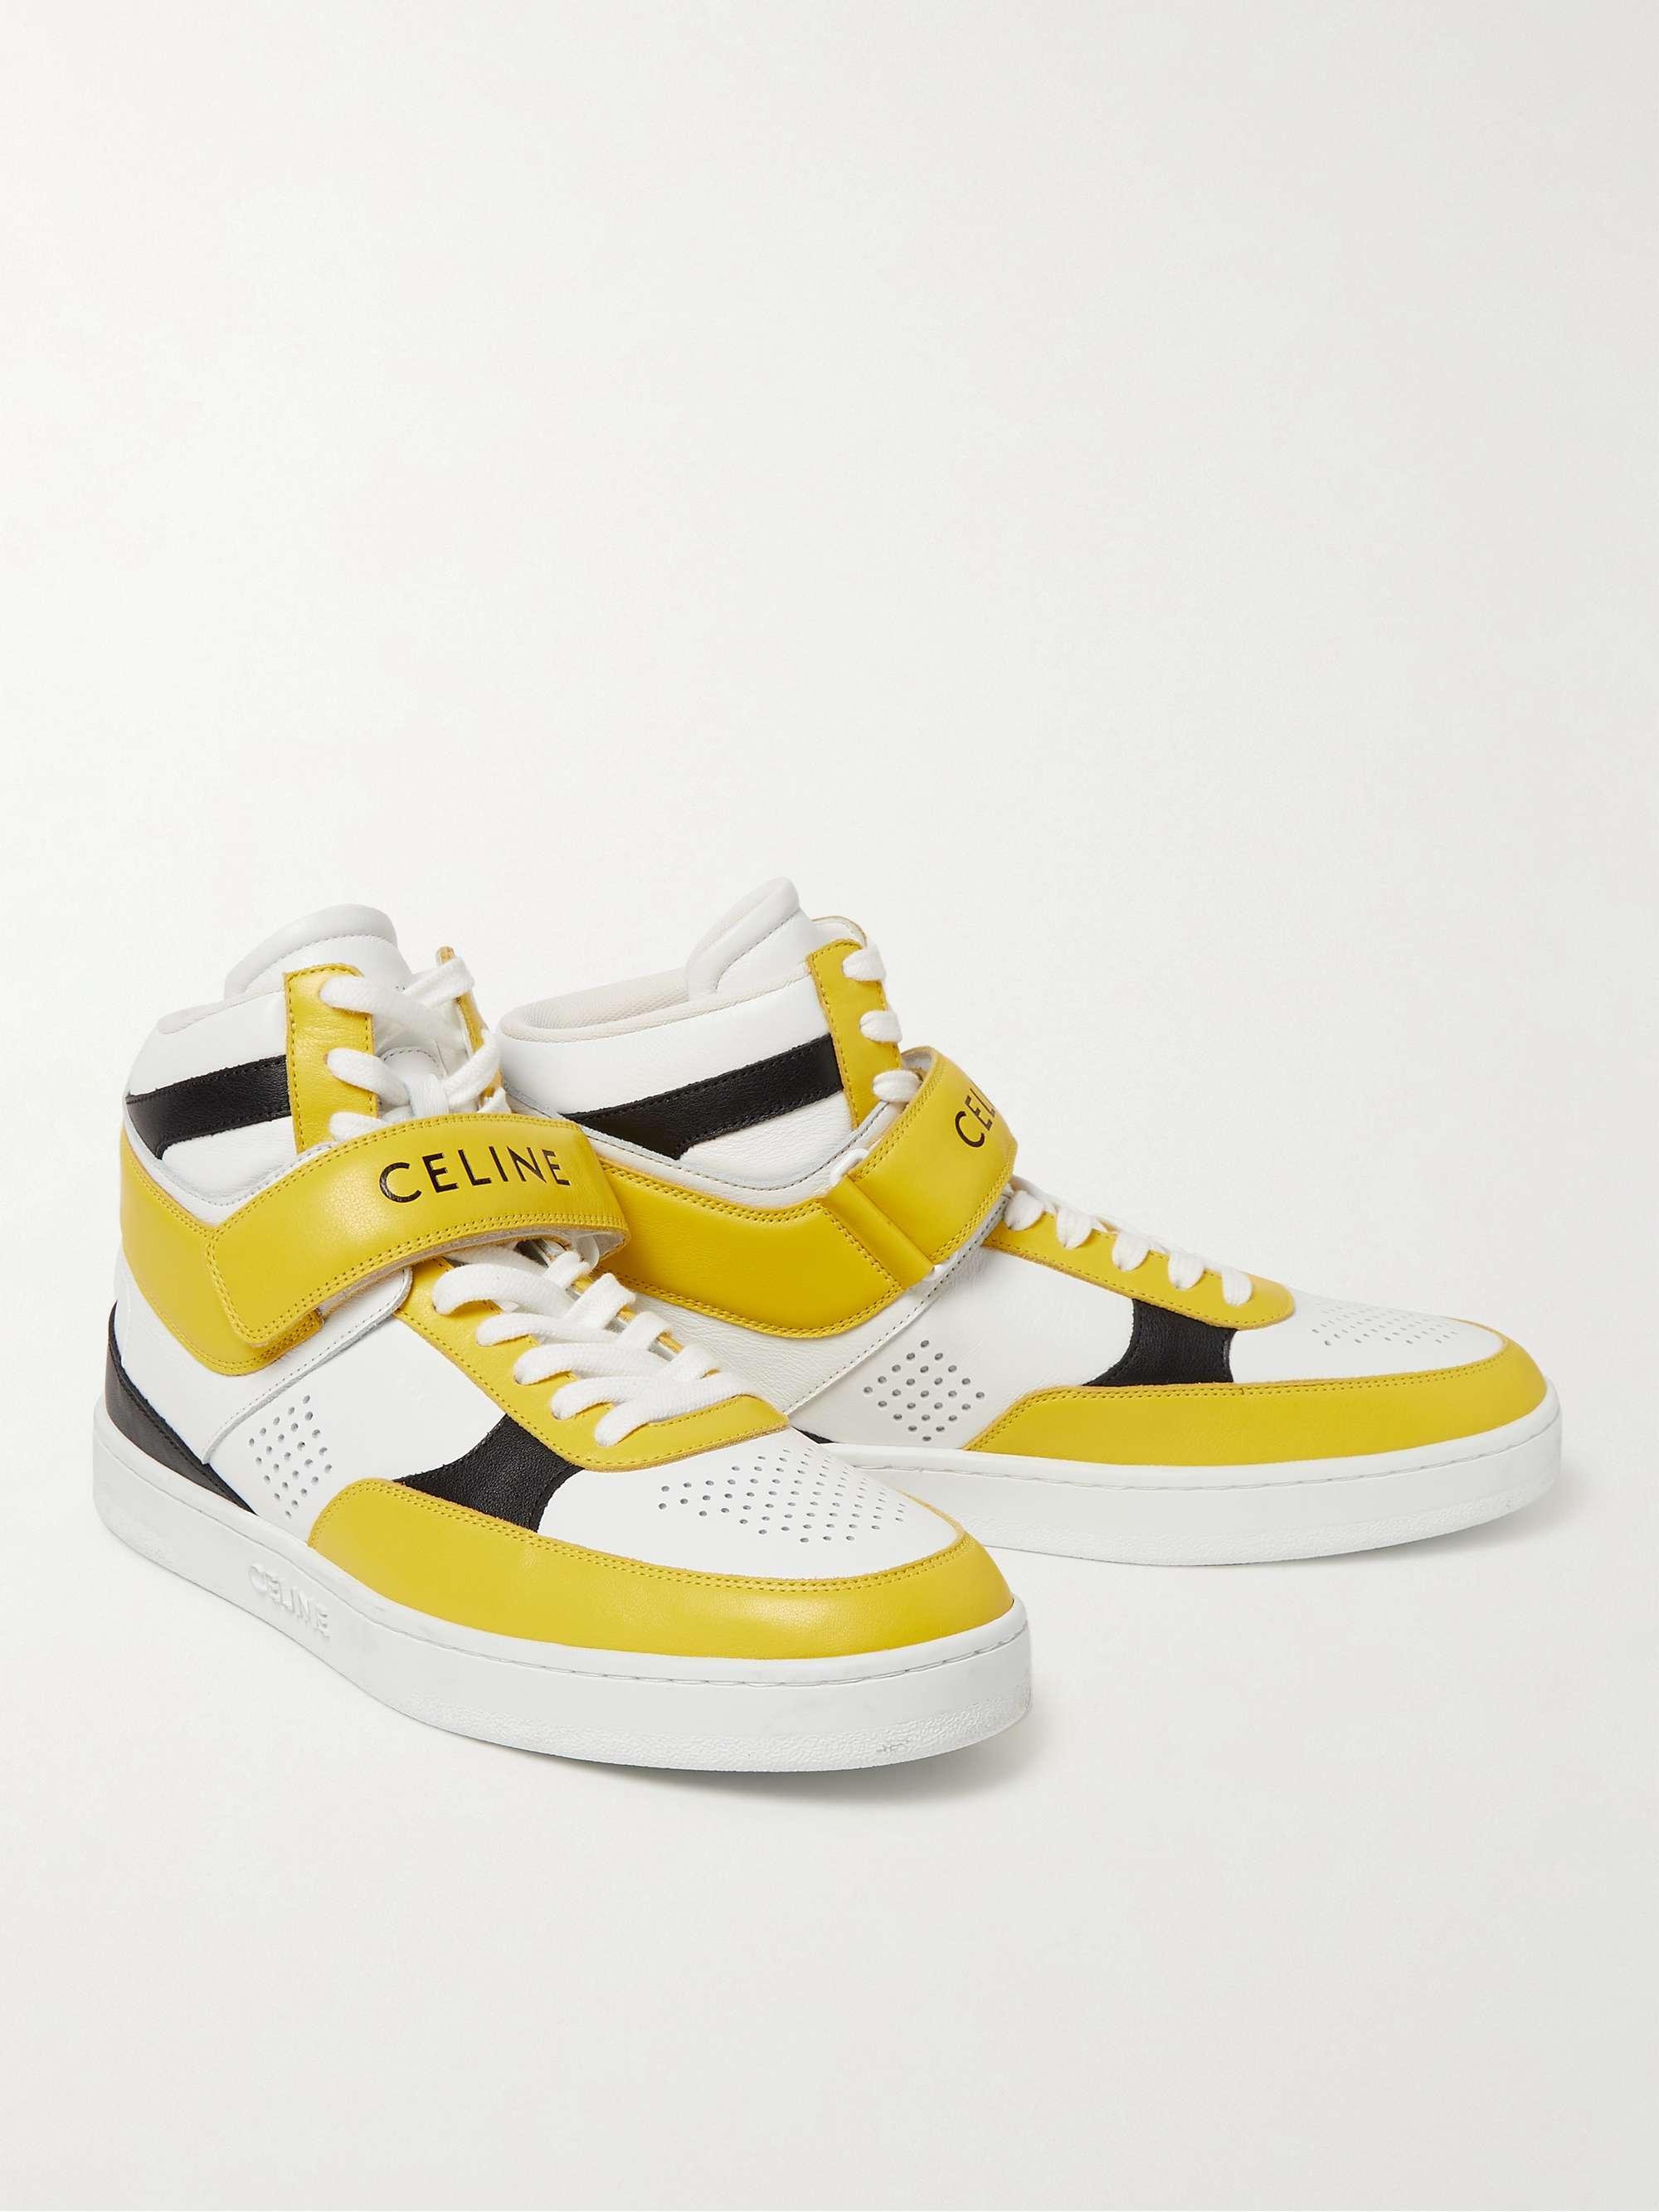 CELINE HOMME Ct-03 Leather High-Top Sneakers